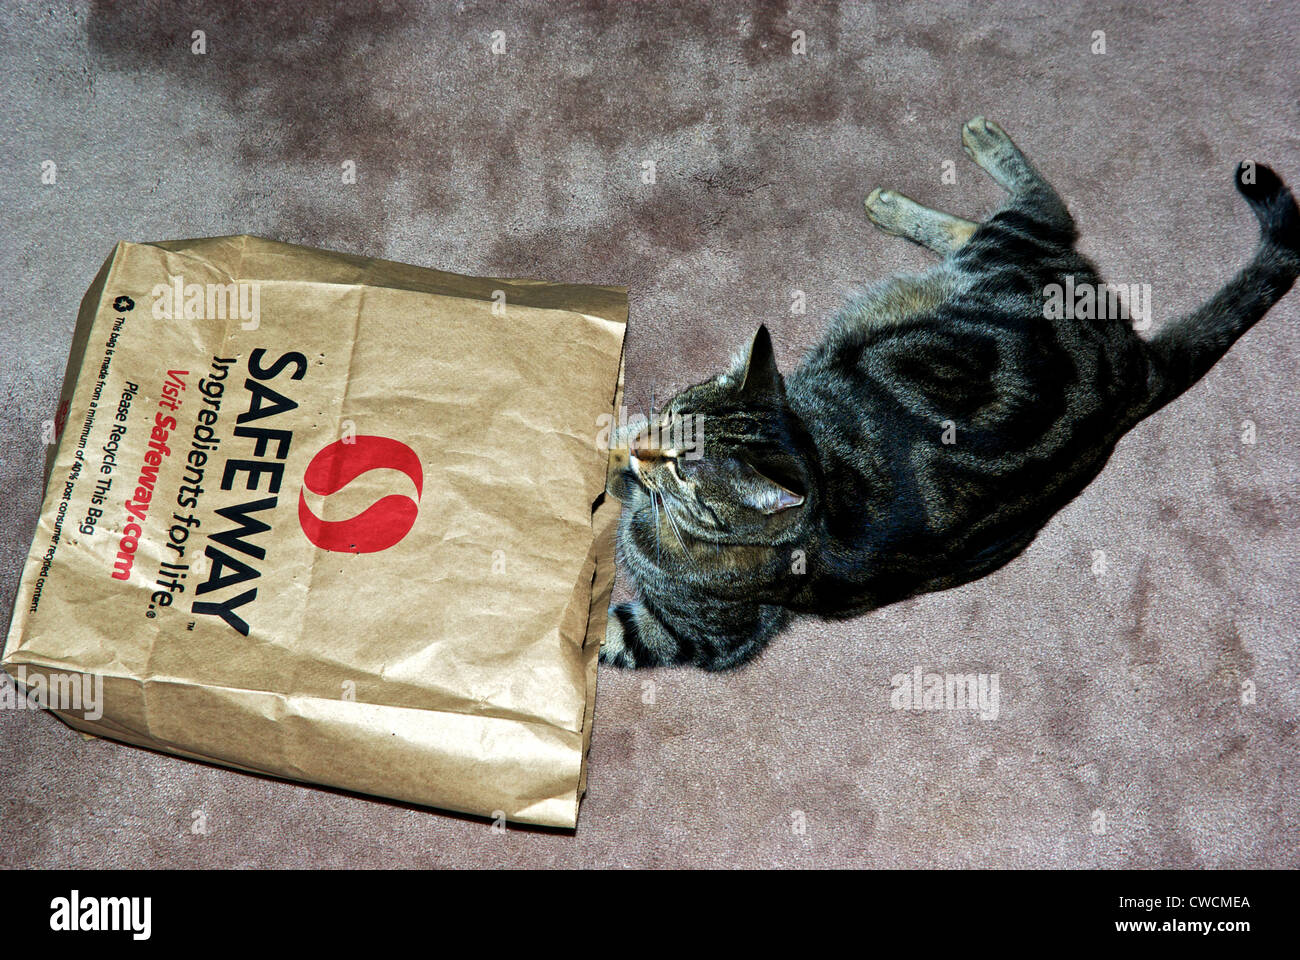 Recycle paper grocery shopping bag reused as free cat toy lair Stock Photo